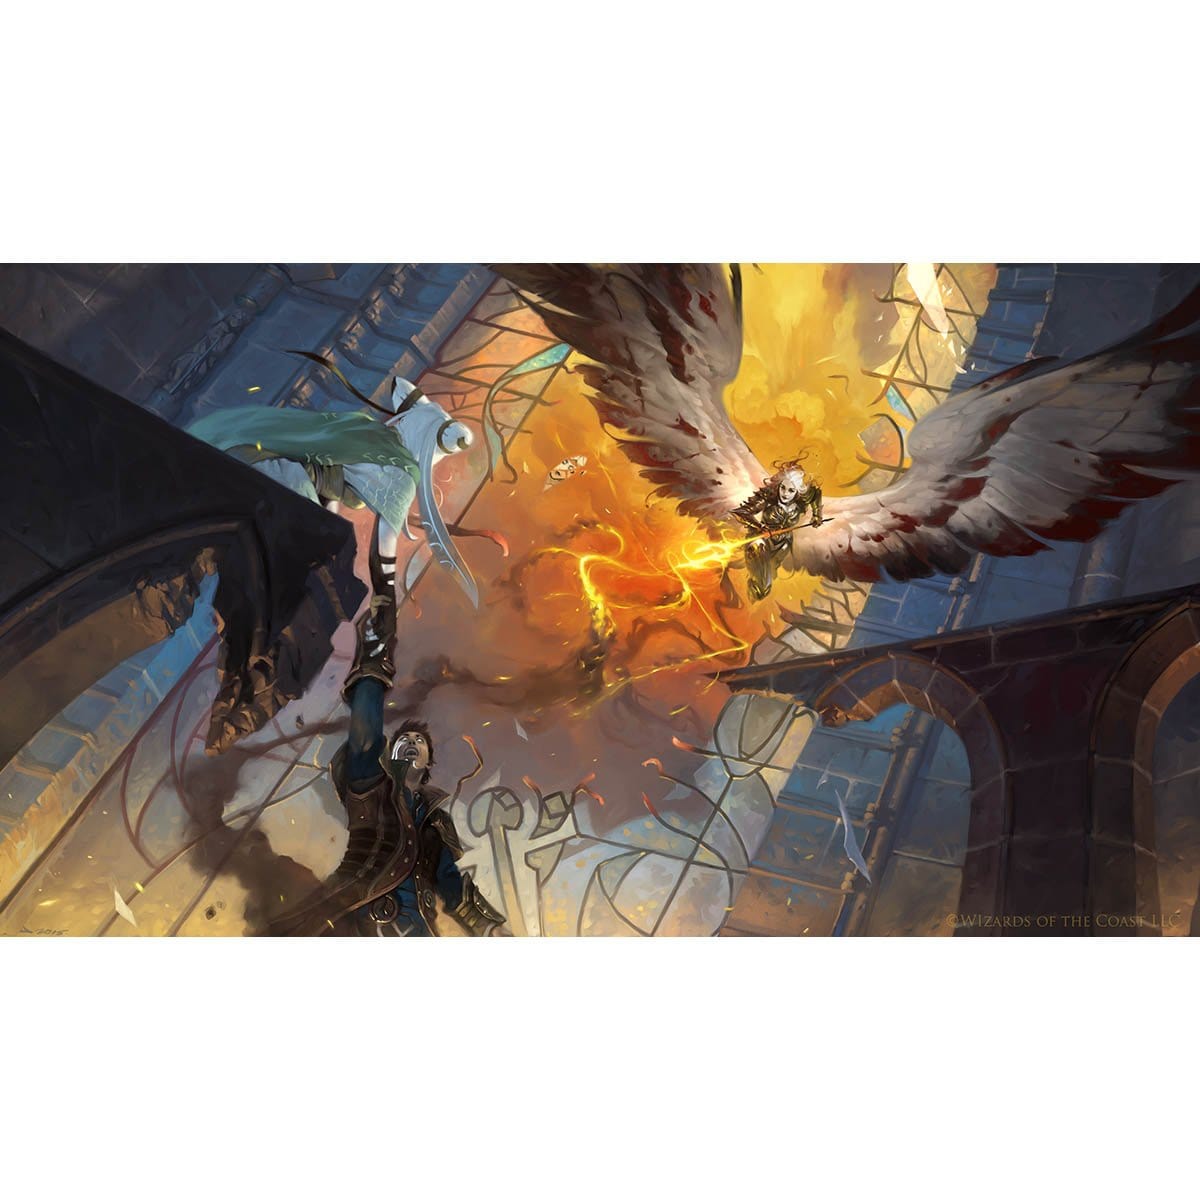 Avacyn&#39;s Judgement Print - Print - Original Magic Art - Accessories for Magic the Gathering and other card games